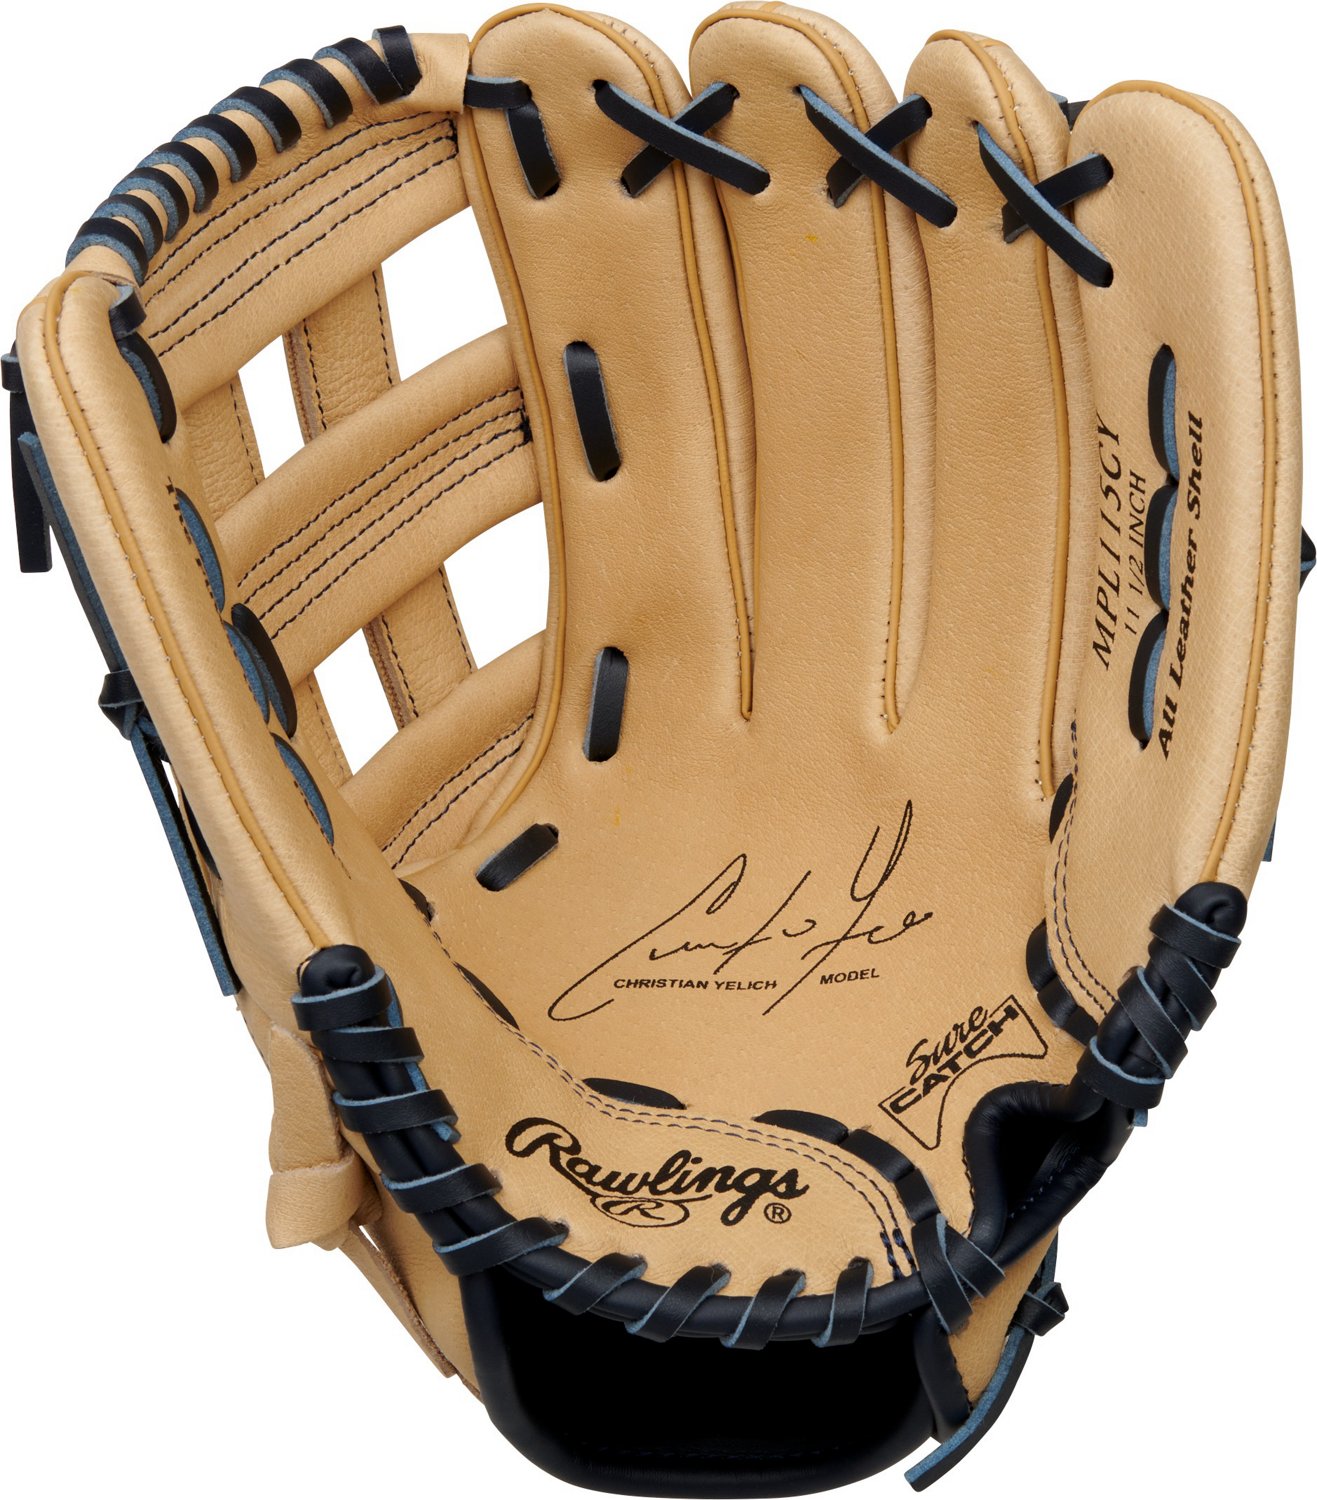 Christian Yelich creates some - Rawlings Sporting Goods